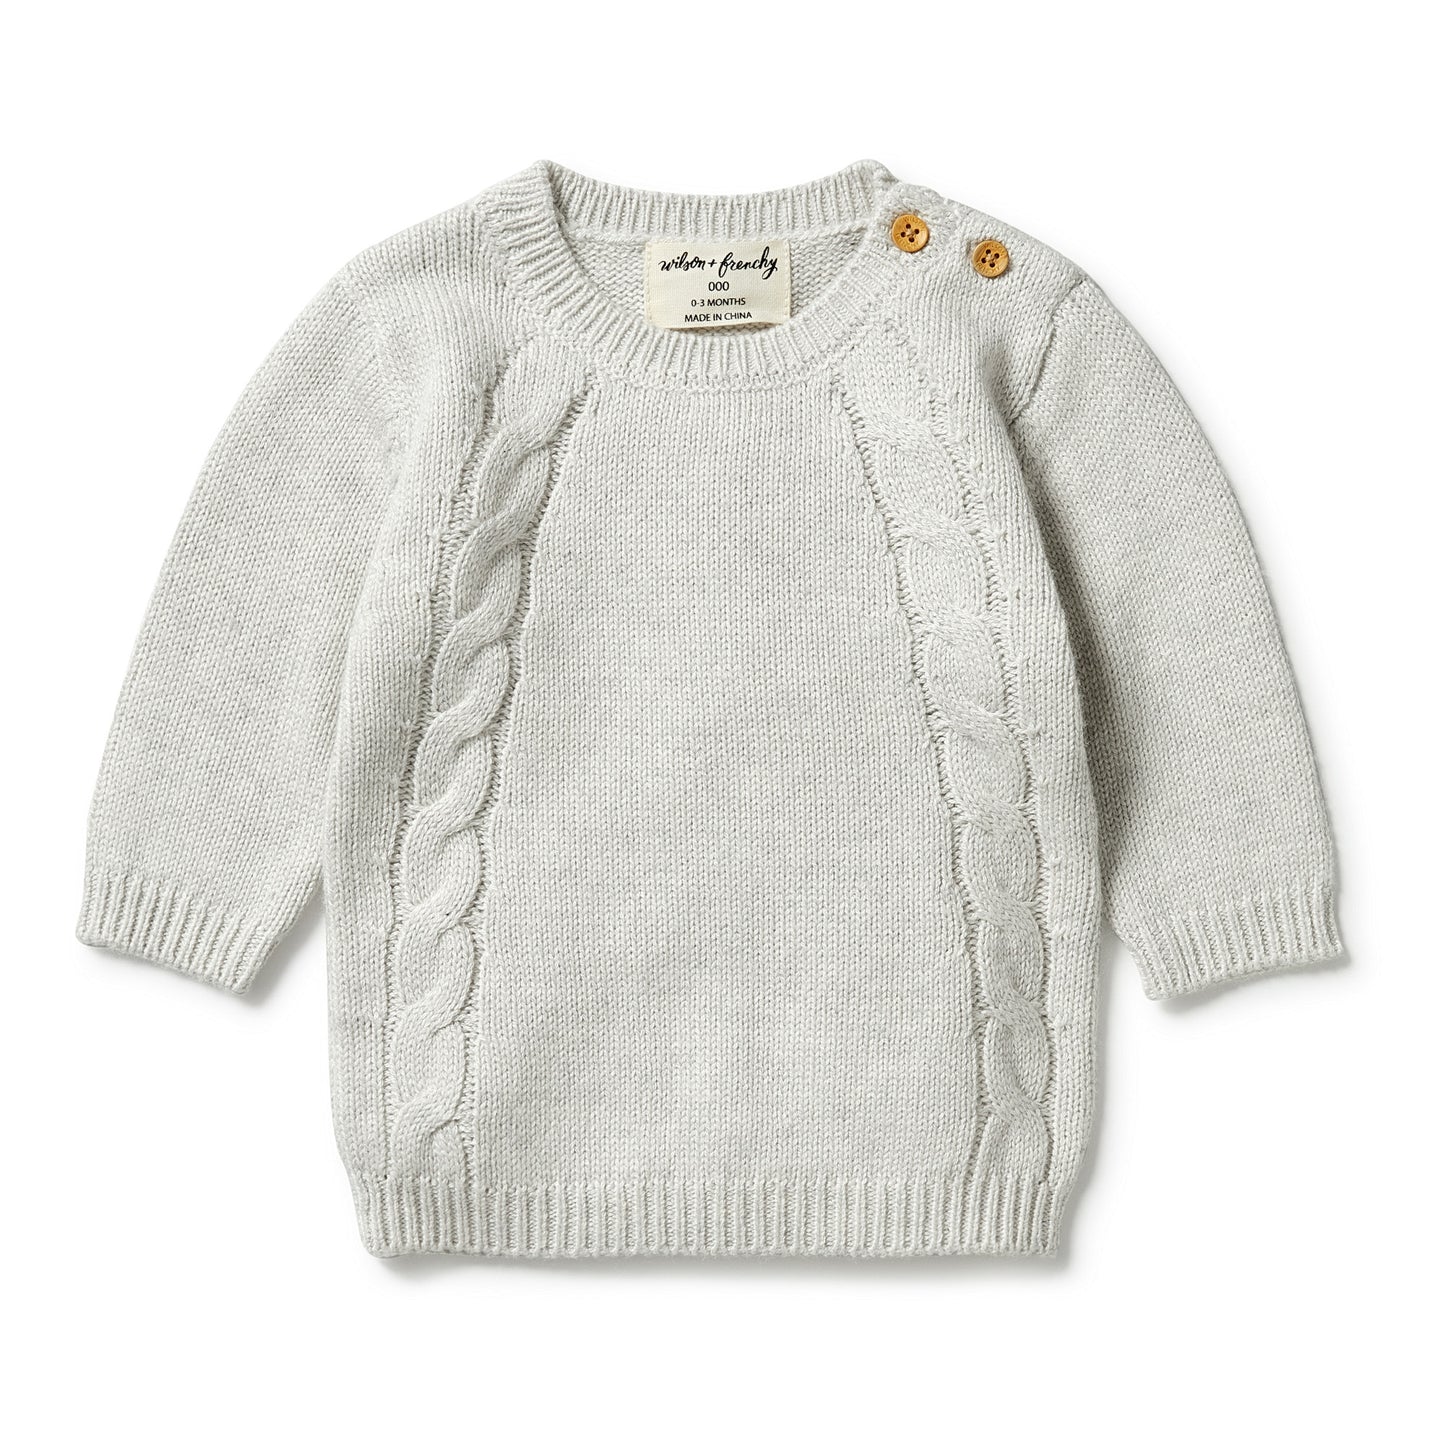 Load image into Gallery viewer, Knit Mini Cable Sweater in Nimbus Gray
